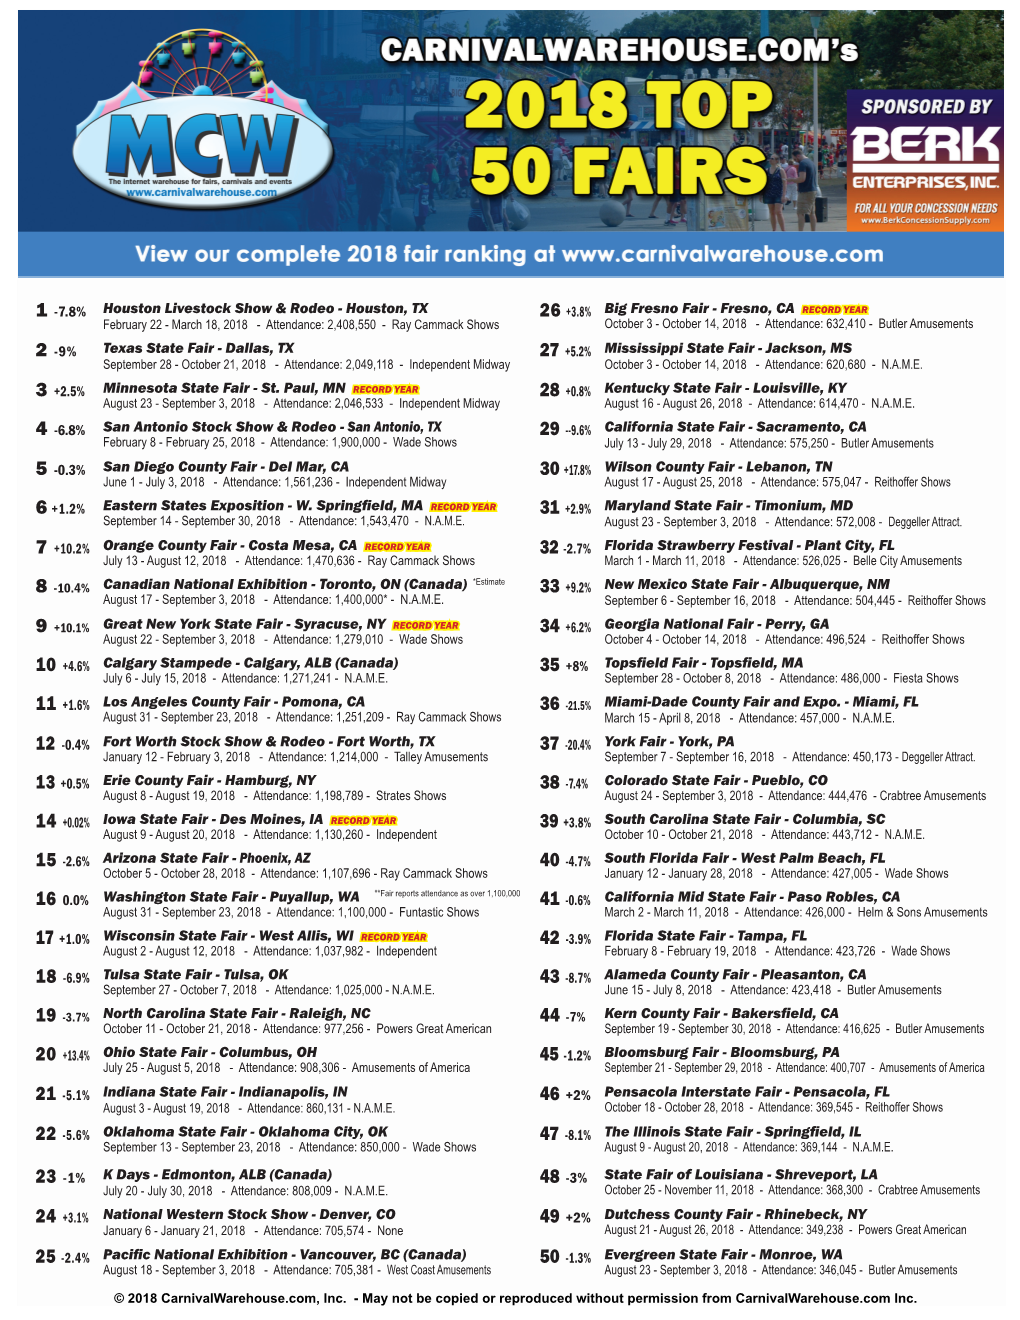 Download the 2018 Top 50 Fairs List